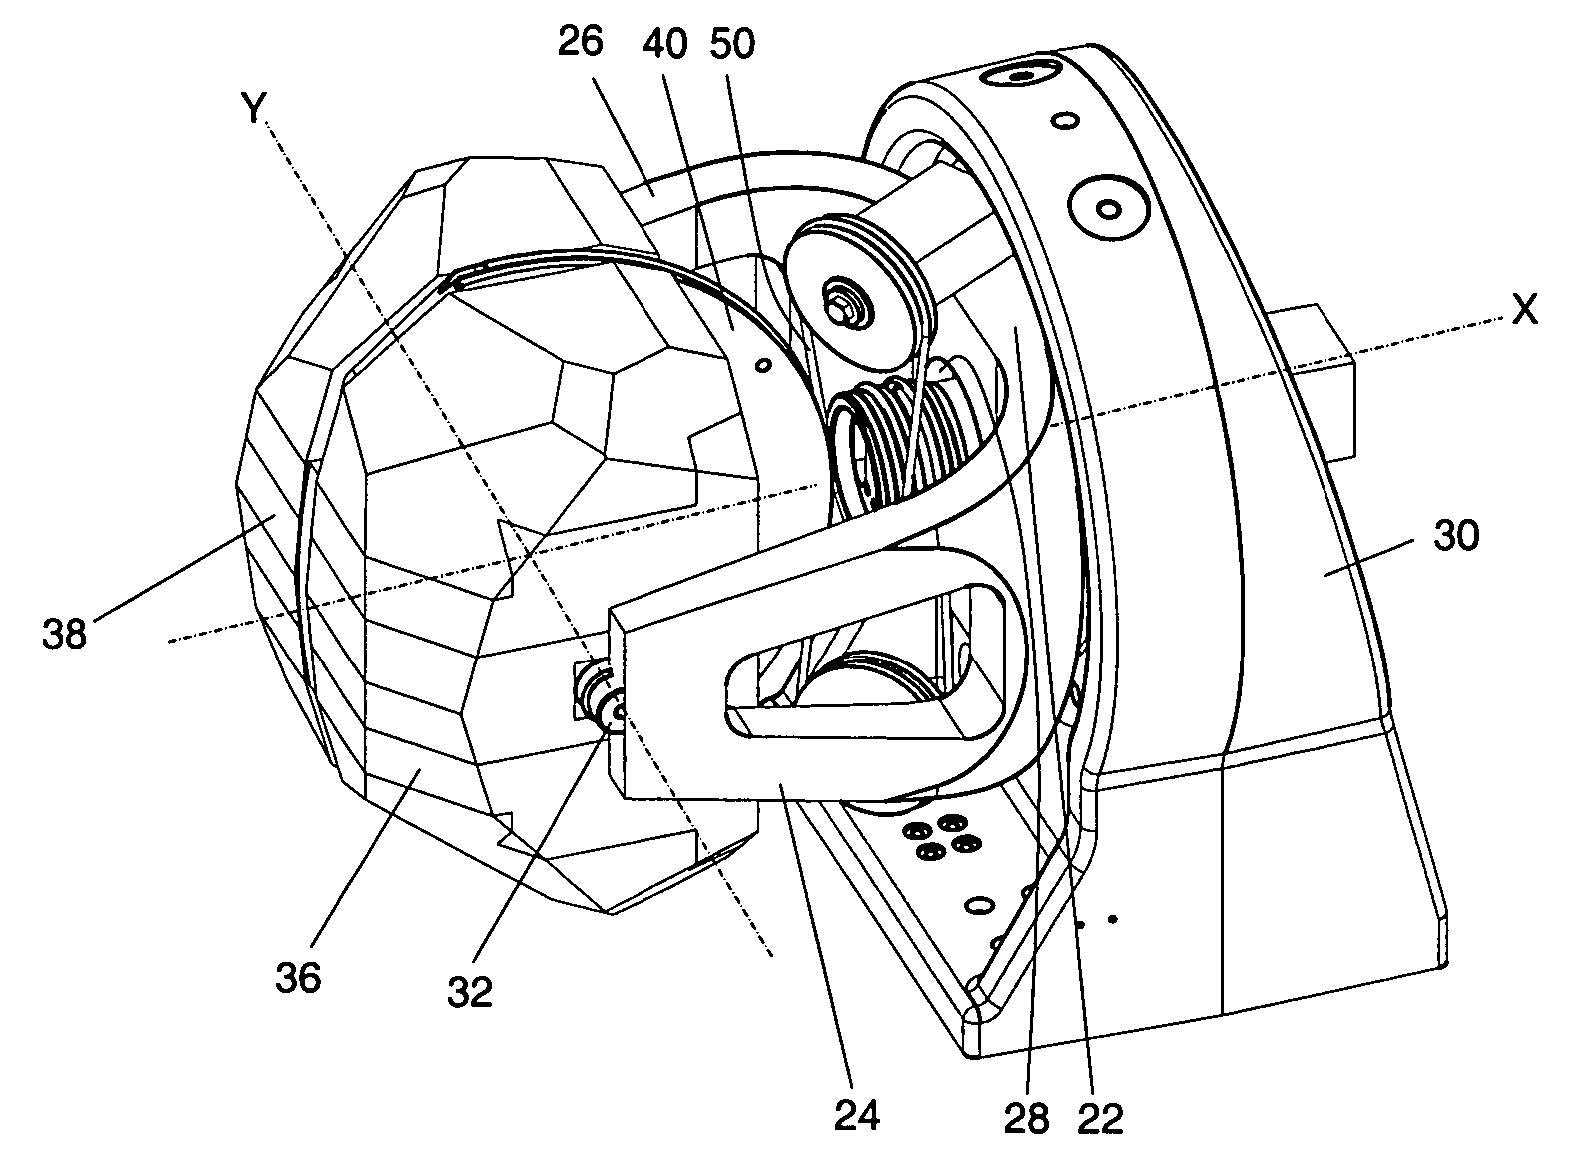 Apparatus for pivotally orienting a projection device